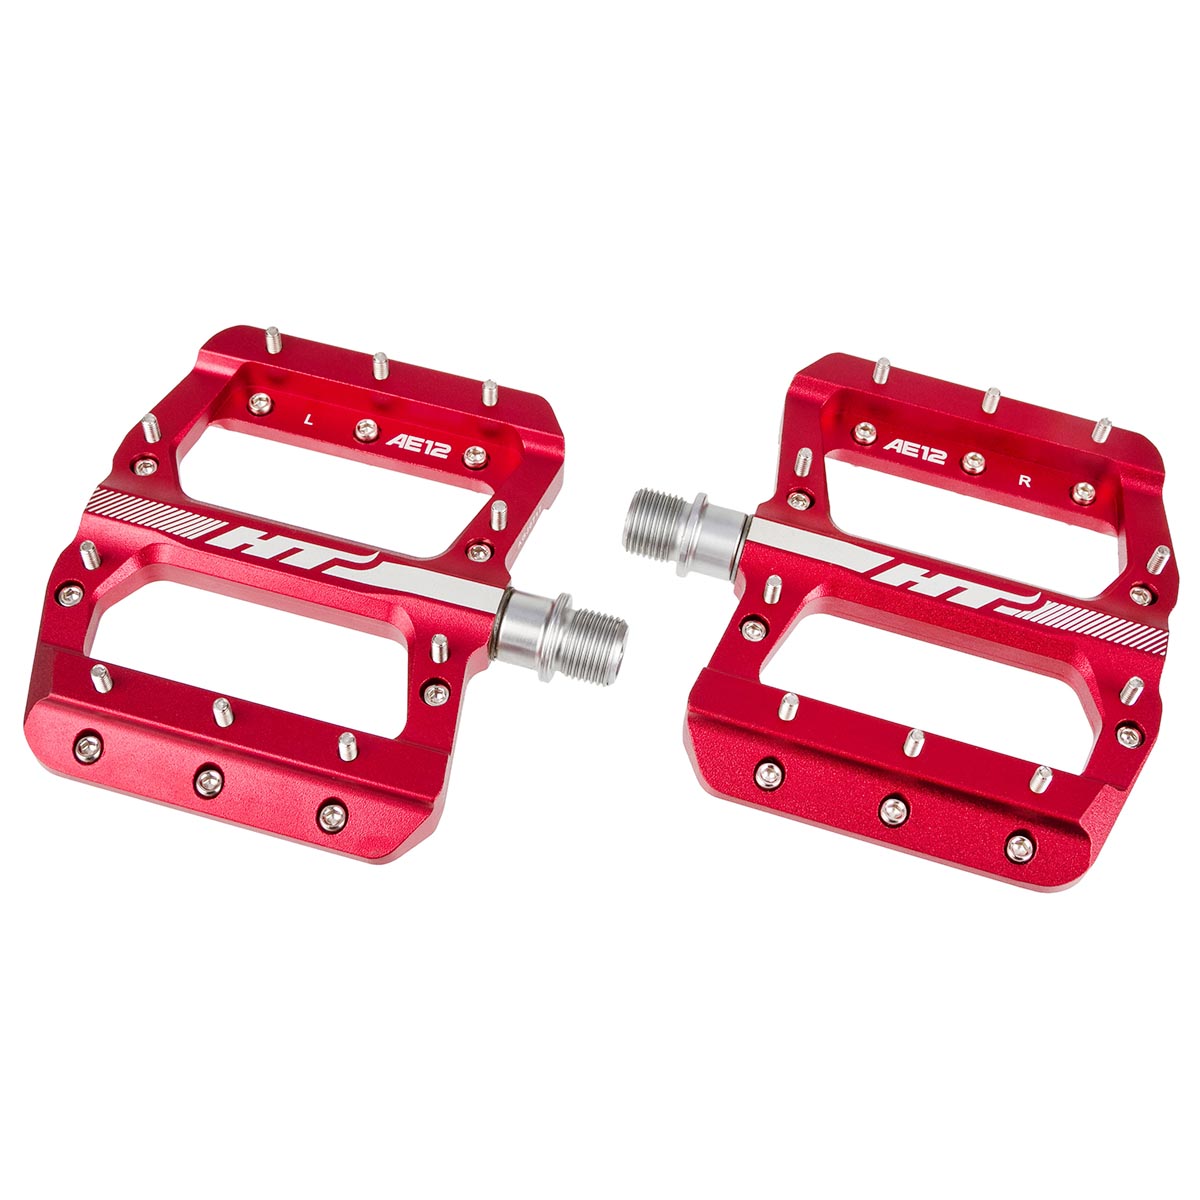 HT Components Pedale AE12 Red